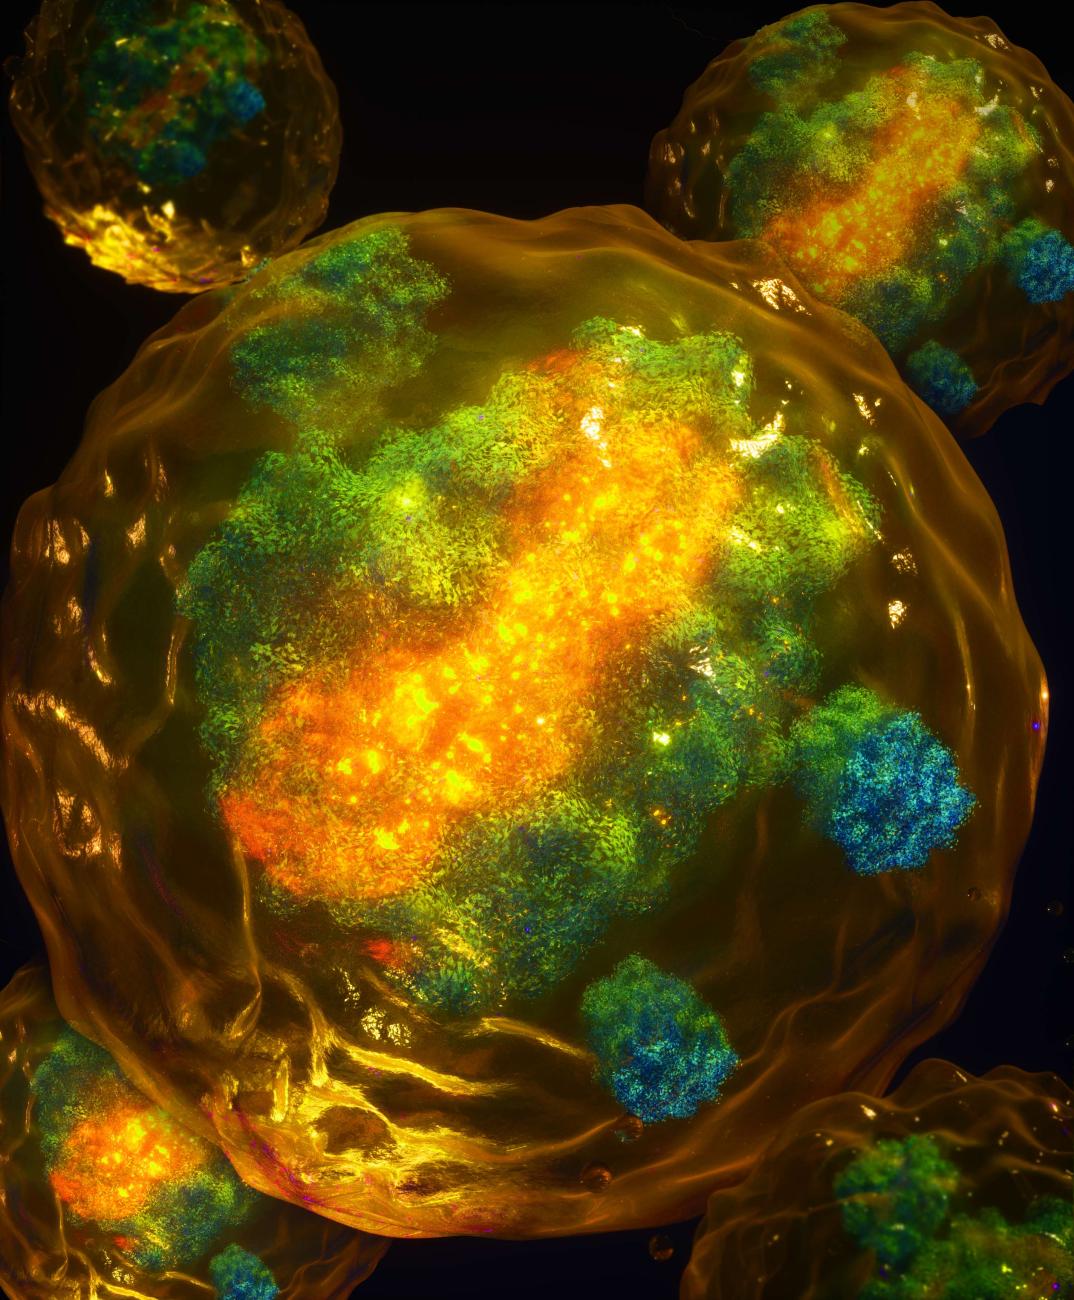 An artistic representation of the newly discovered trans-action by XIST, showing the X chromosome (yellow) and the extended and dispersed distribution of XIST (green) across the X chromosome and beyond, i.e. to autosomes, as seen with microscopy.